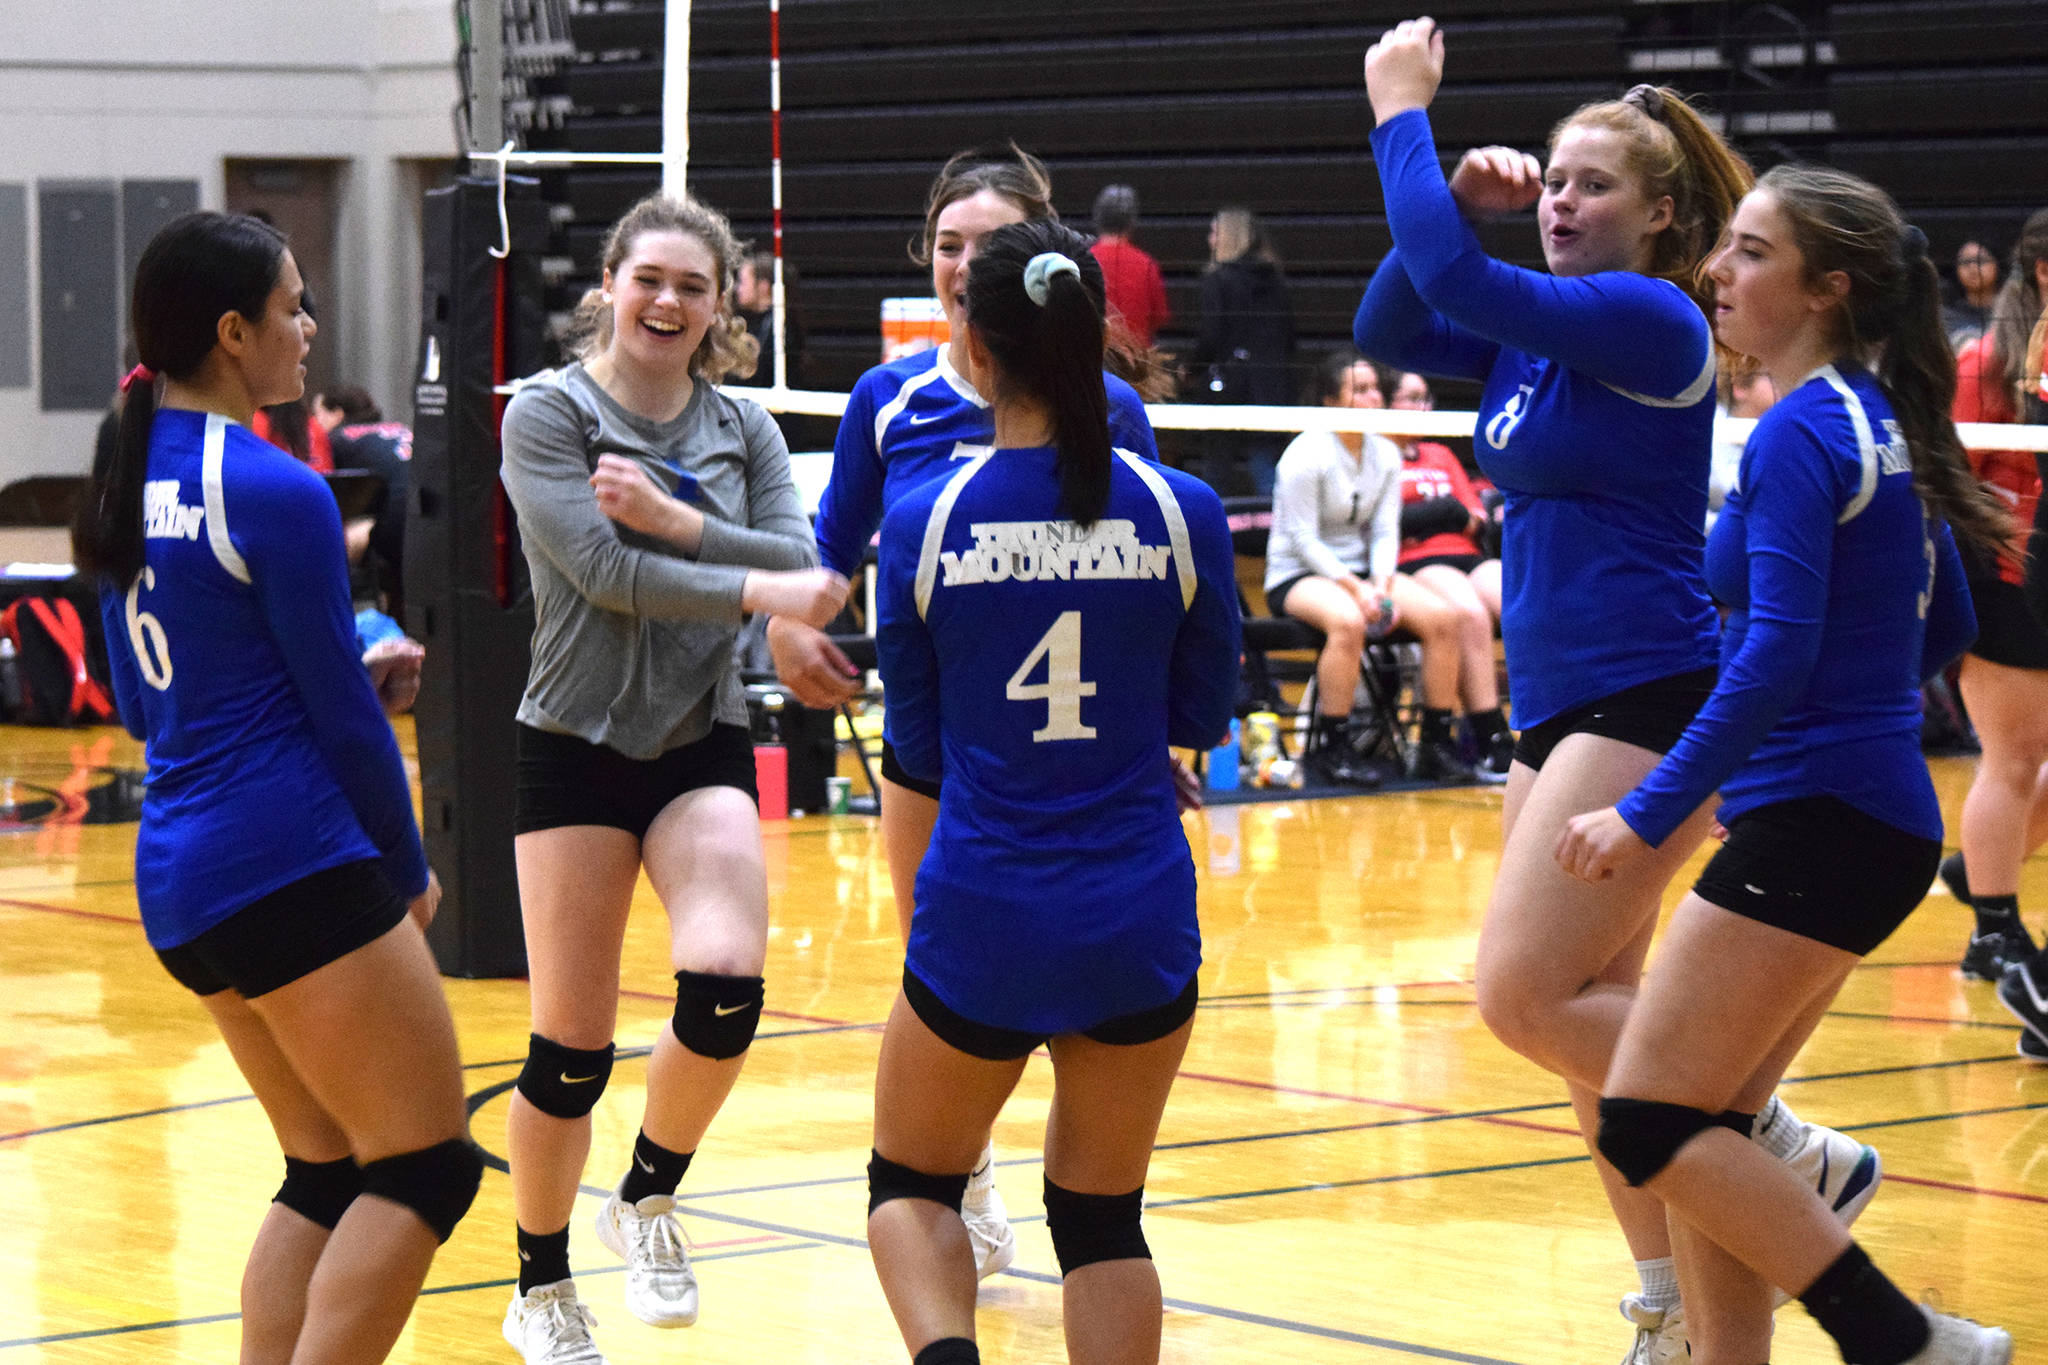 Thunder Mountain High School celebrates a point against Klawock at the JIVE (Juneau Invitational Volleyball Extravaganza) Tournament at Juneau-Douglas High School: Yadaat.at Kalé on Friday, Oct. 11, 2019. (Nolin Ainsworth | Juneau Empire)